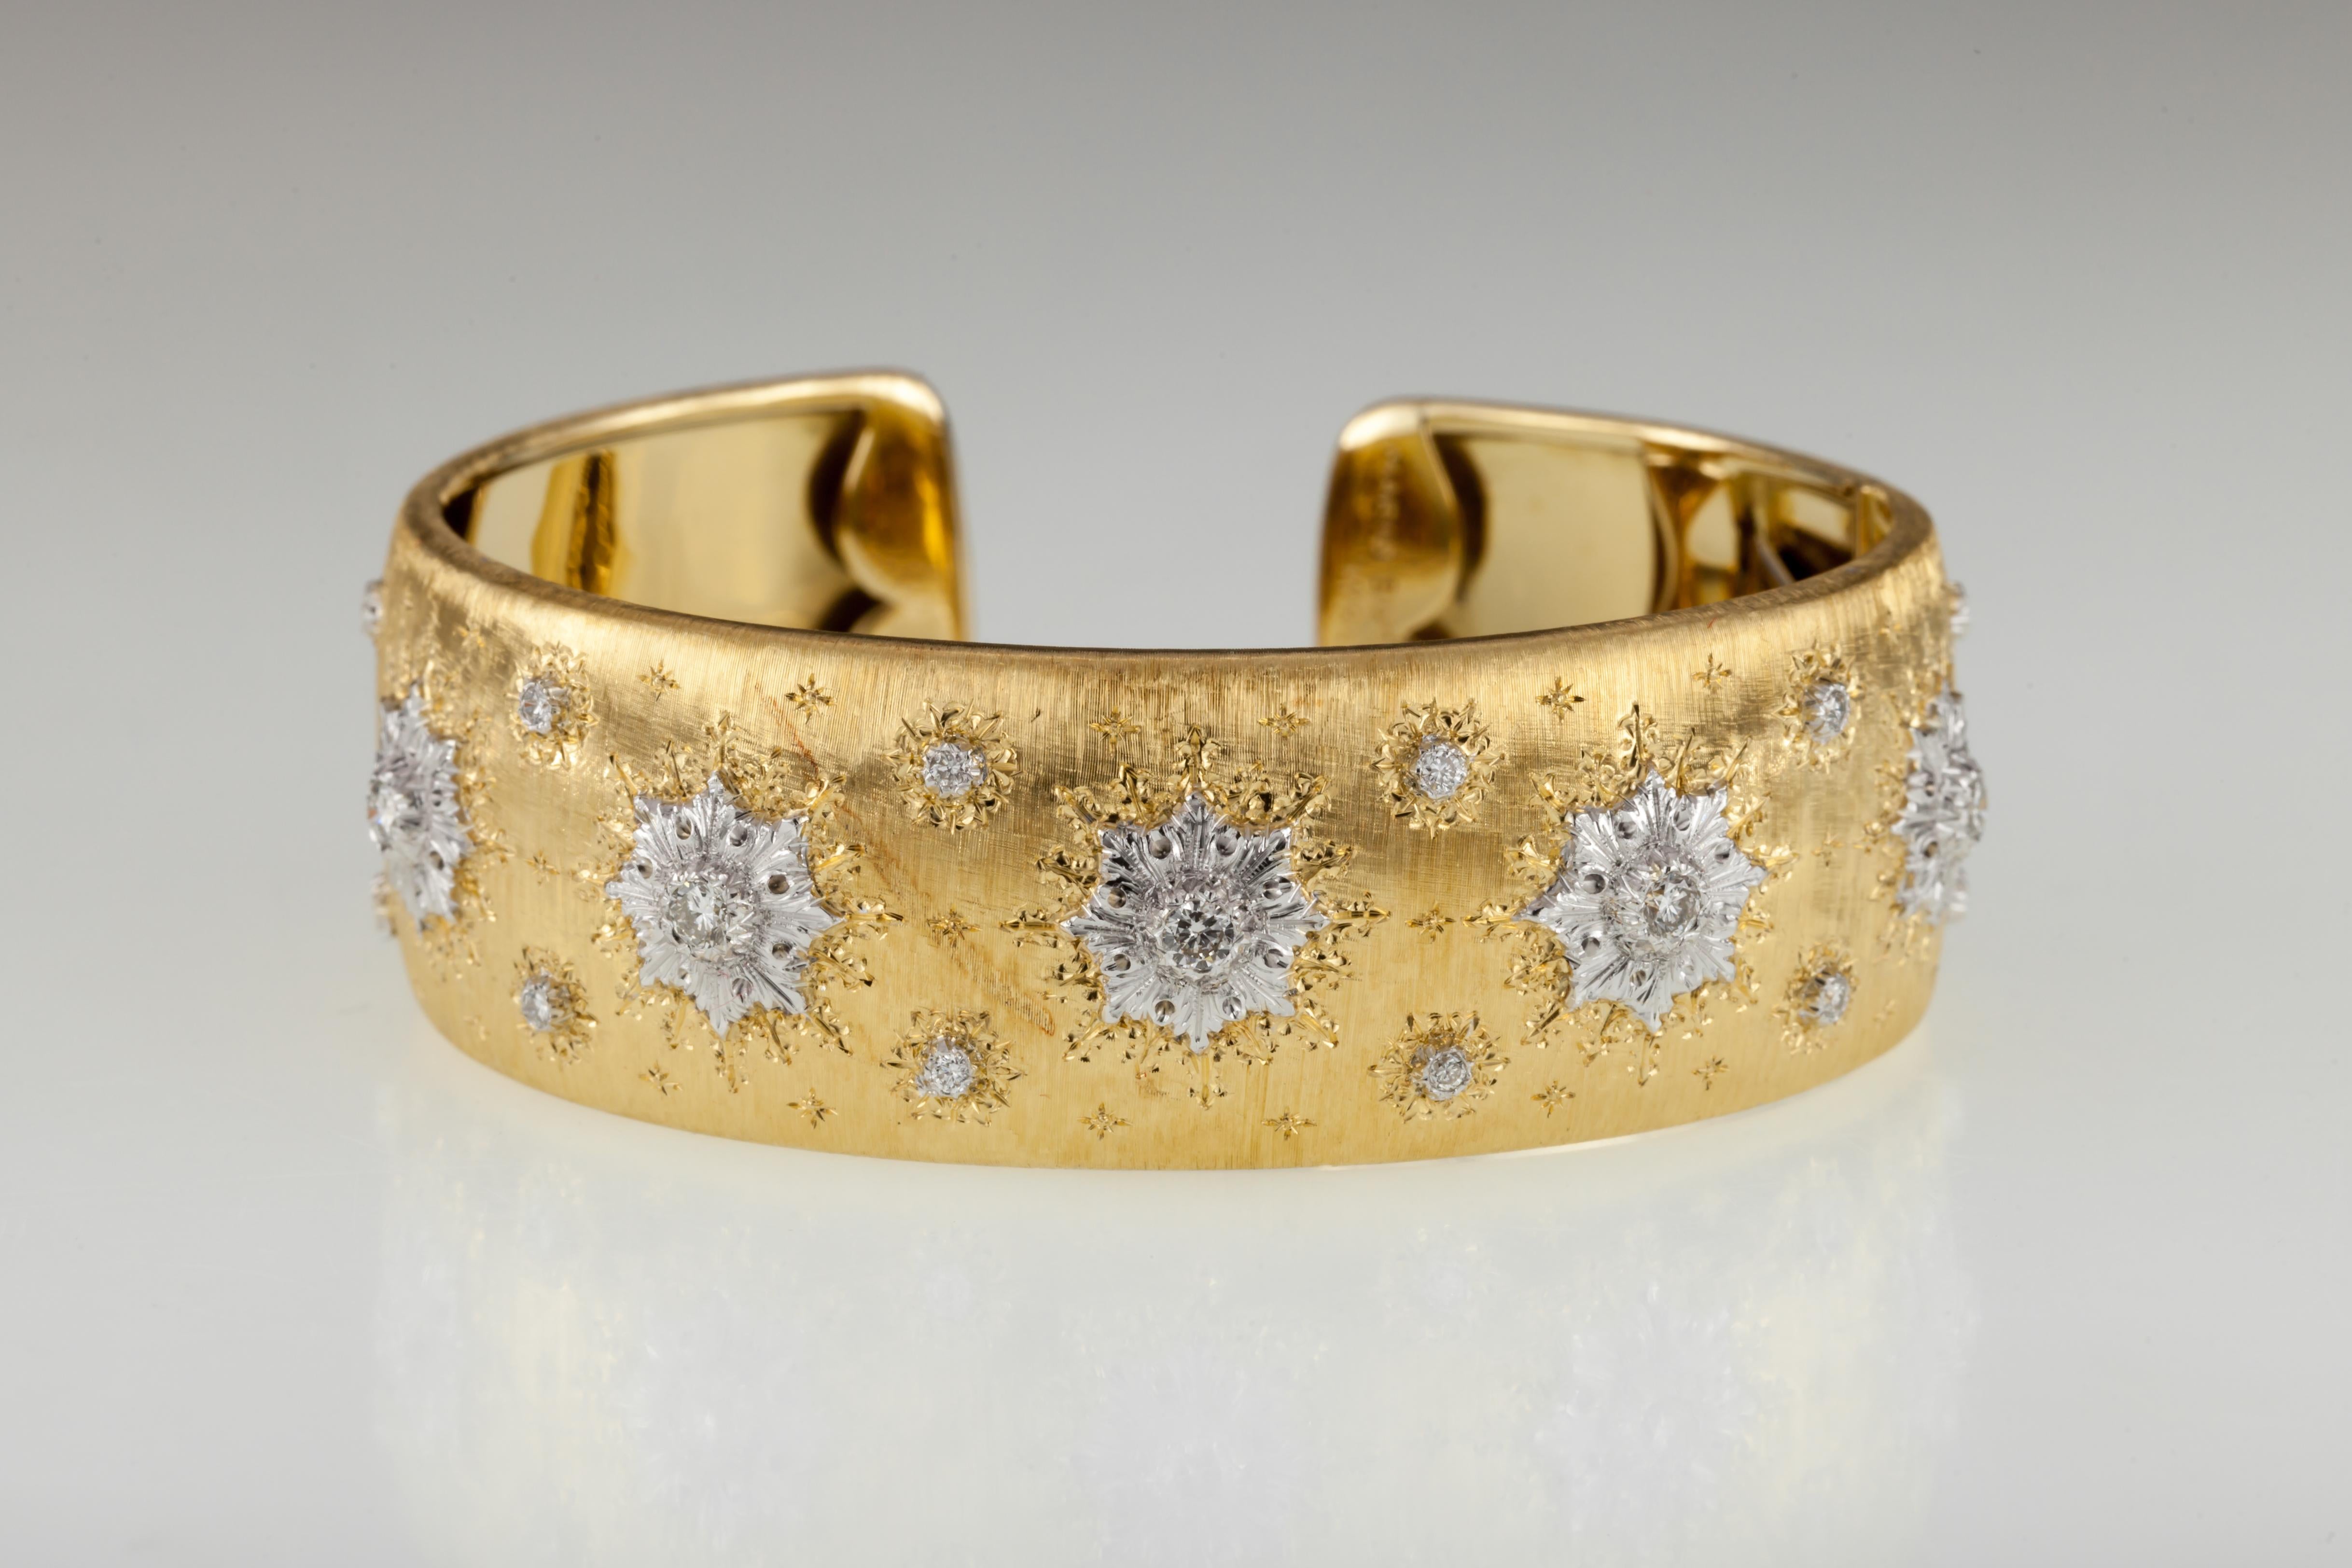 Beautiful Vintage Cuff Bracelet Designed by Mario Buccellati
Snowflake Motif
Brushed Gold Etched with Snowflake Patterns and set with round diamonds in White Gold Settings
Width of Cuff = Appx 20 mm
Inner Circumference (Wrist Fit) = 6.5